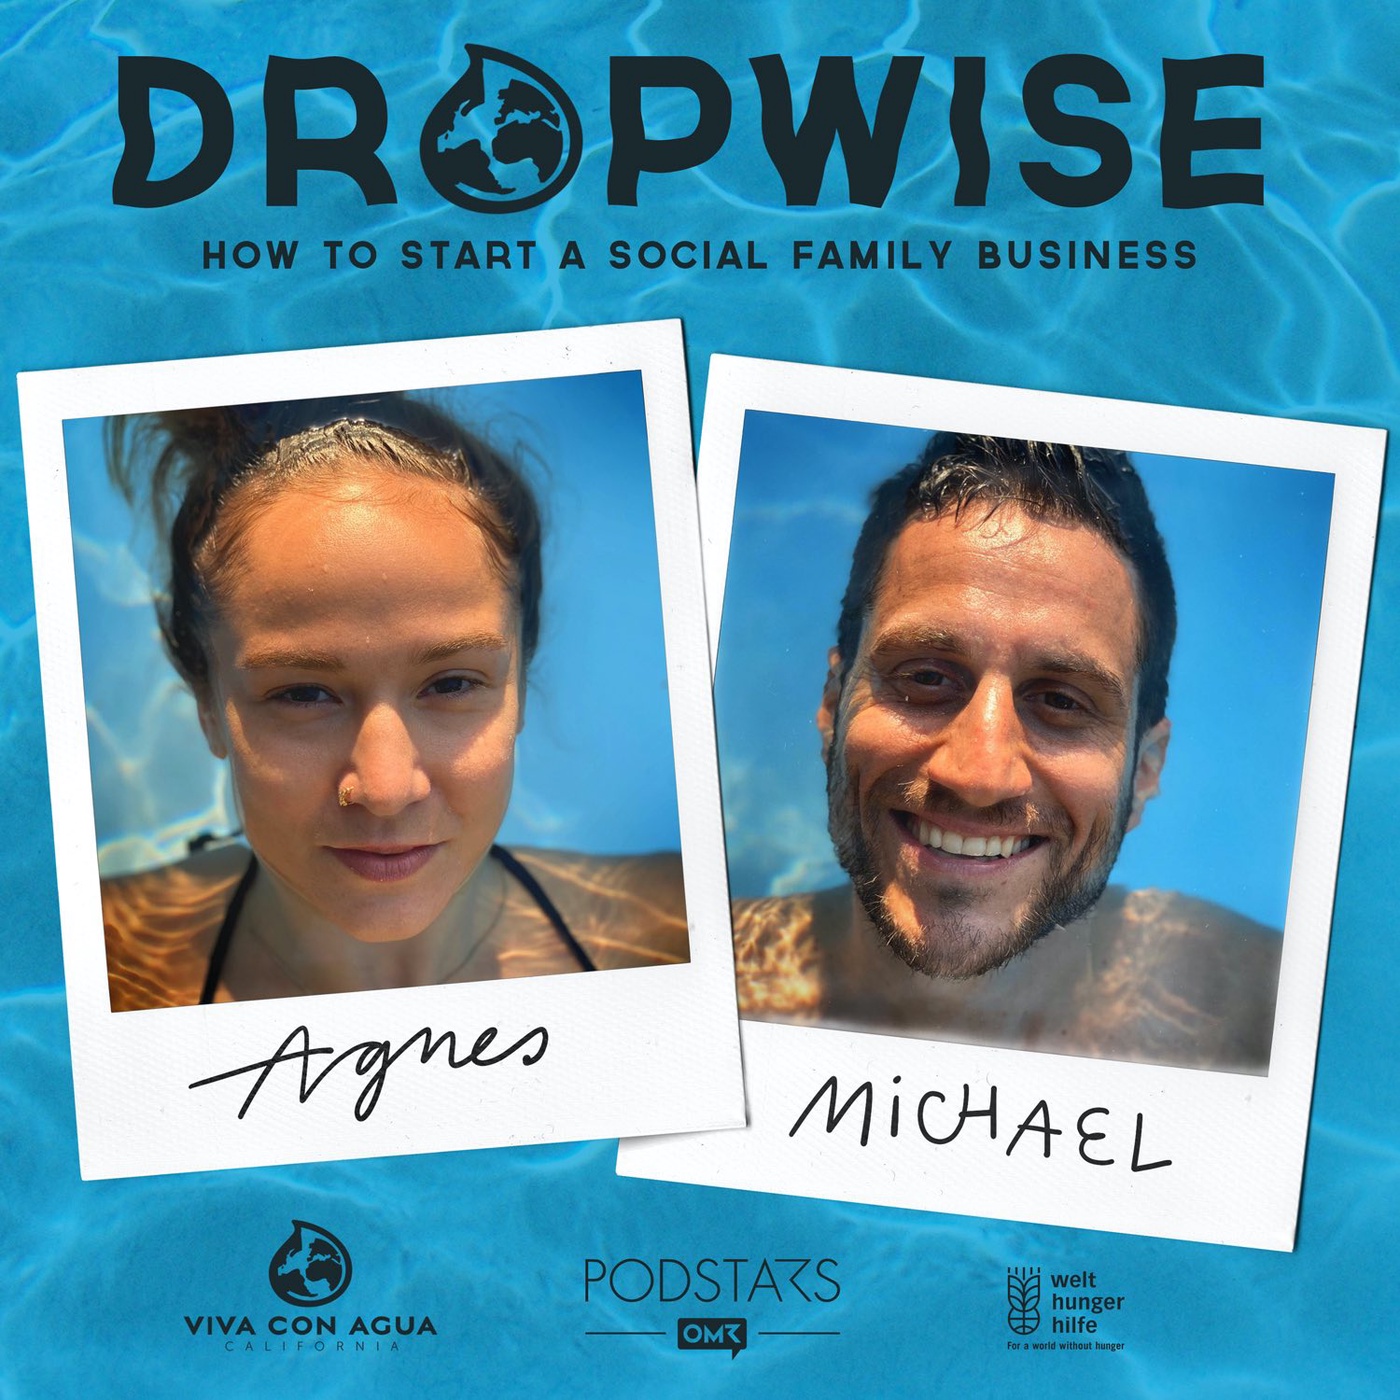 Dropwise #4 - Just do it